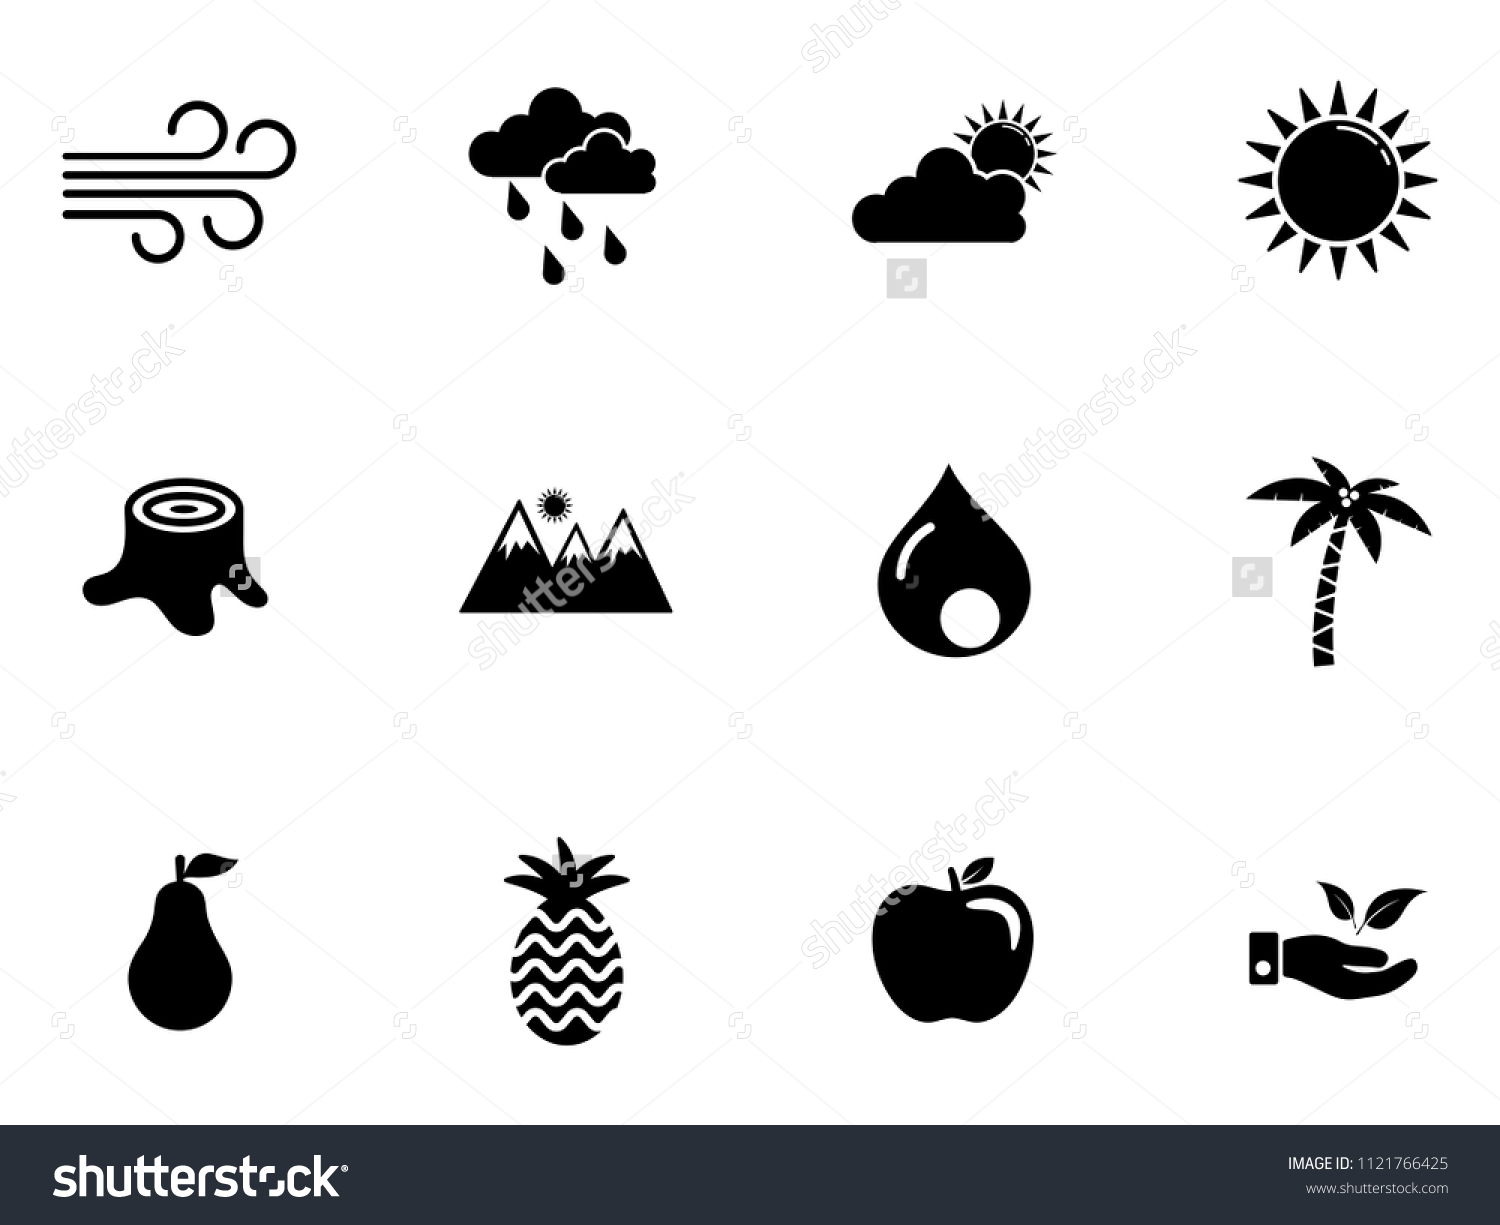 vector nature sign symbols. eco, ecology, environment and organic icons set #1121766425